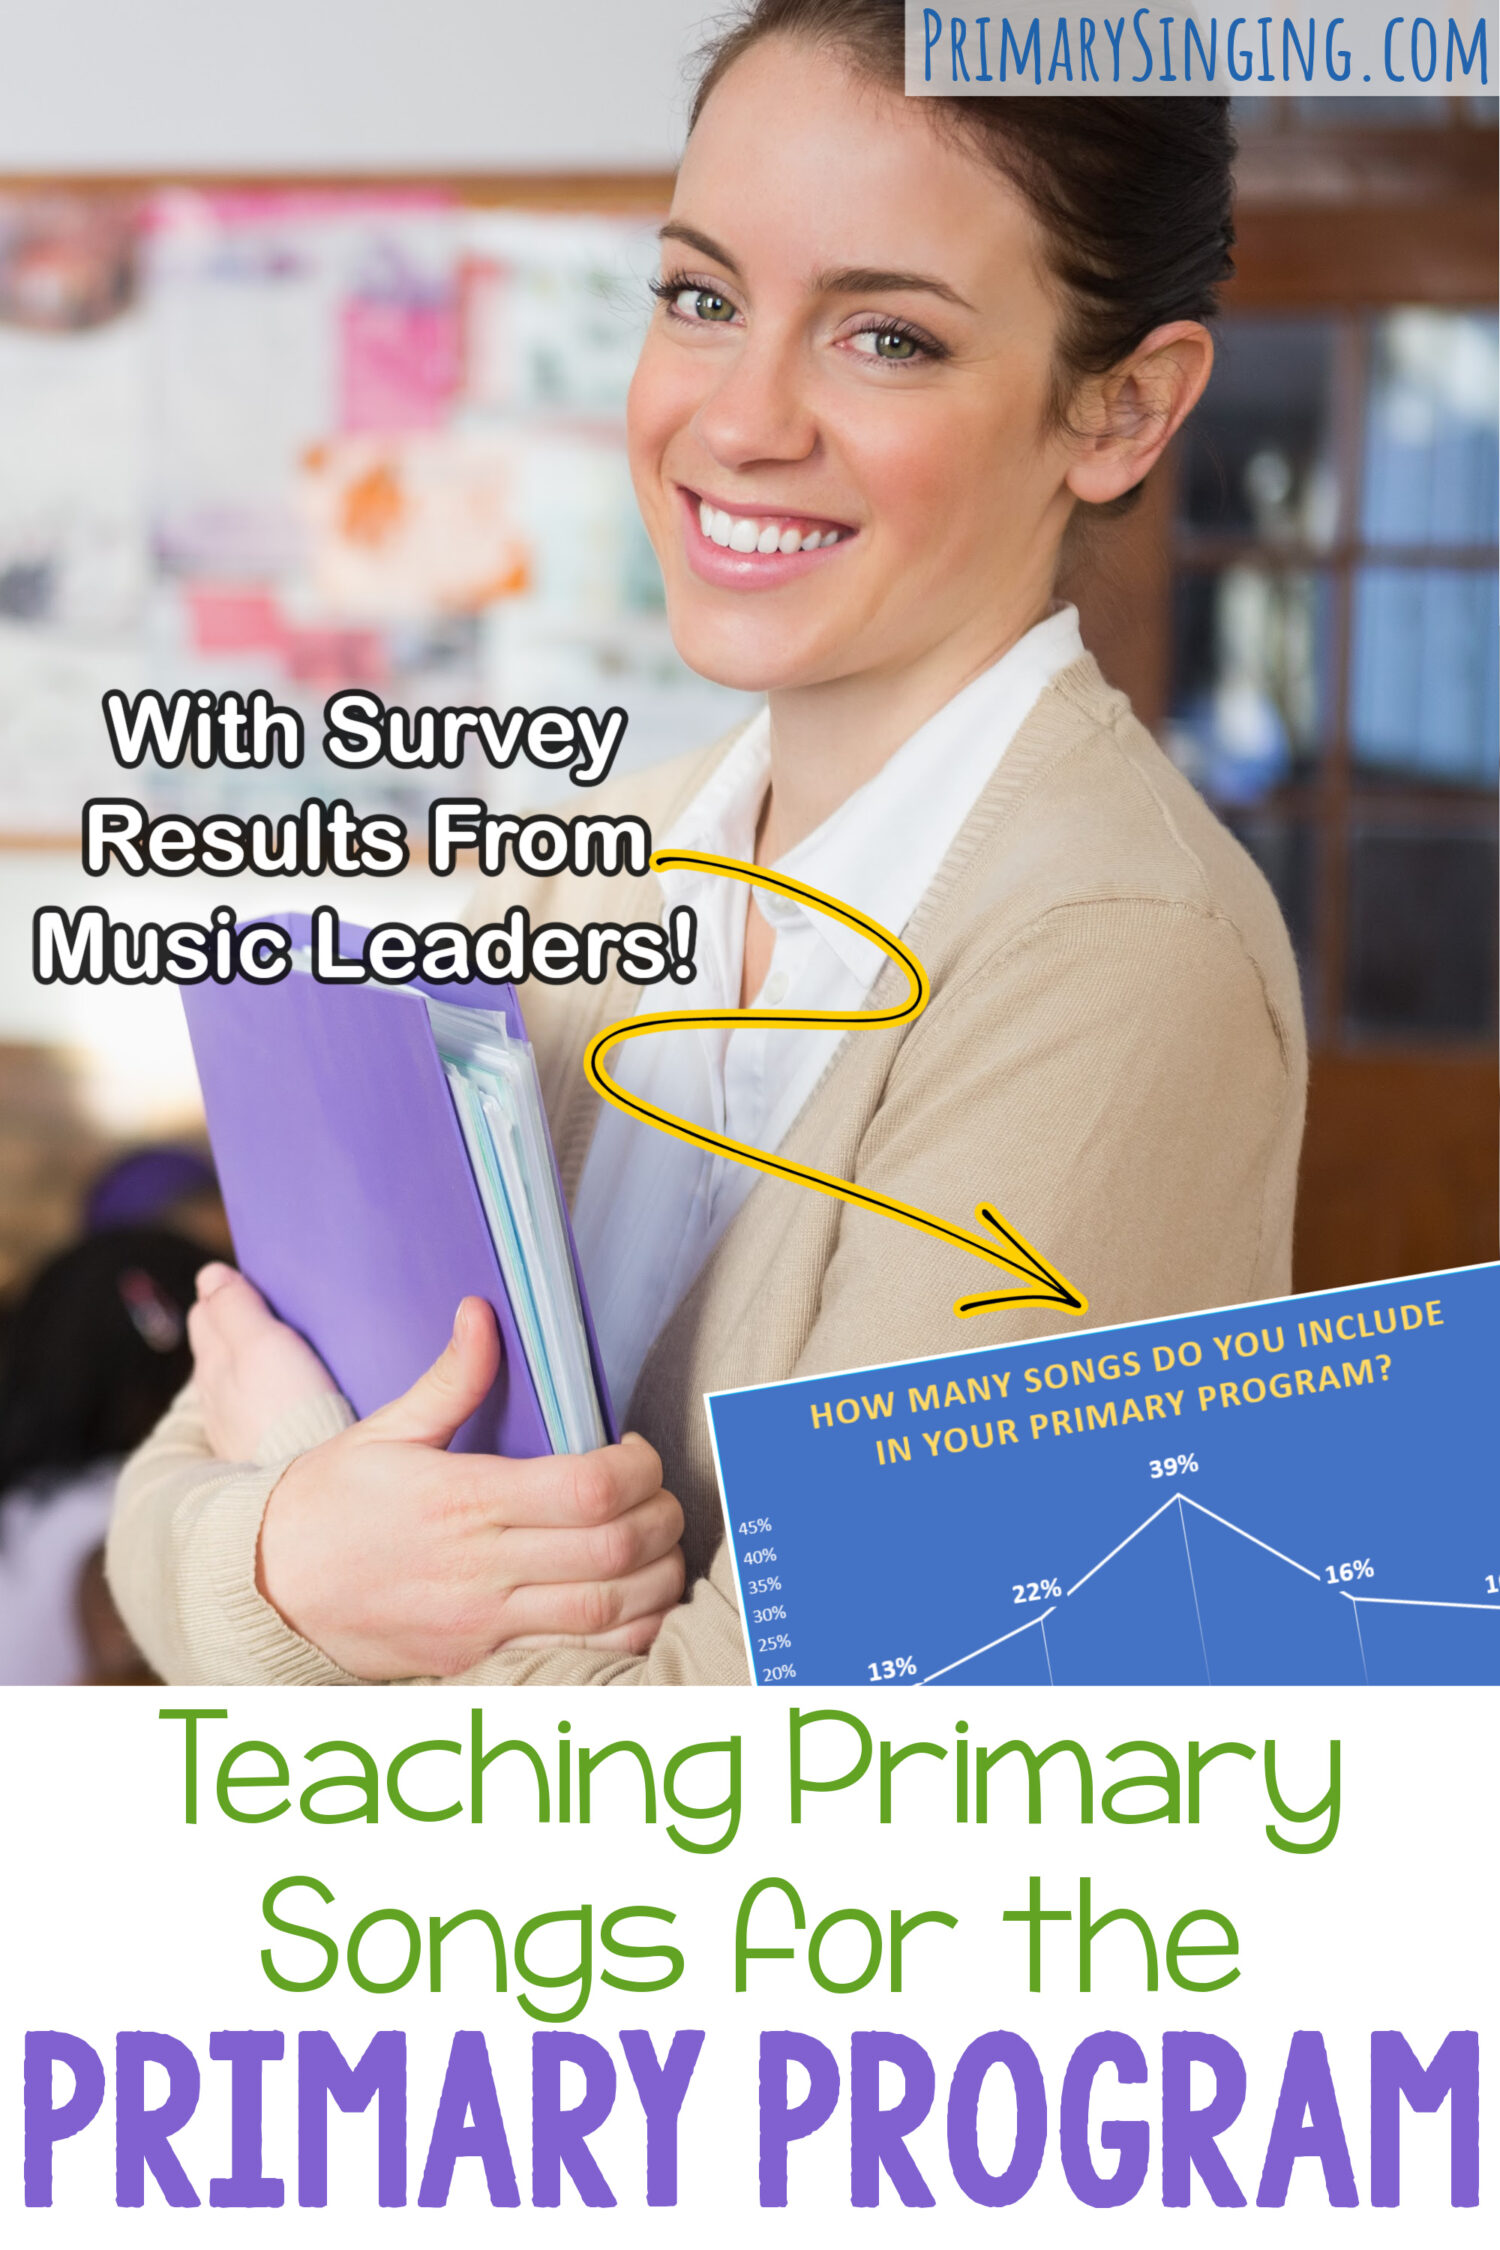 Teaching Primary Songs for the Primary Program - tips and common questions from LDS Primary Music Leaders including how many songs to include in the Program Presentation, how to review for the program, after program activities and ideas, singing occasions, and more! Answers are from actual Primary music leaders survey results for a super informative post you'll love to help you with your own singing time.